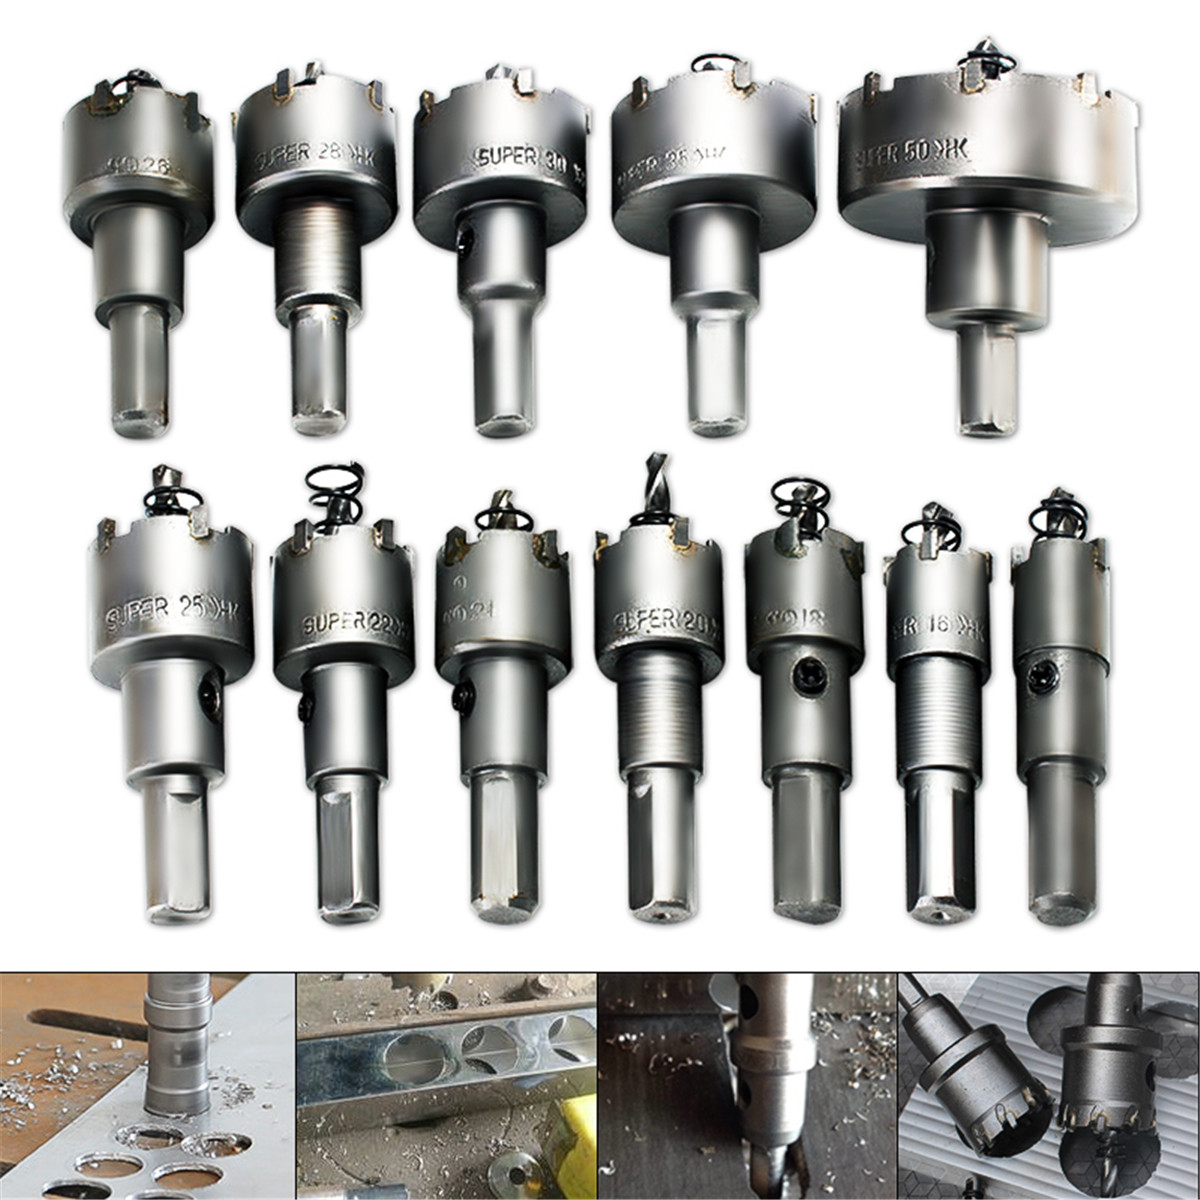 Drillpro-12pcs-15mm-50mm-Hole-Saw-Cutter-Alloy-Drill-Bit-Set-for-Wood-Metal-Cutting-1959242-2